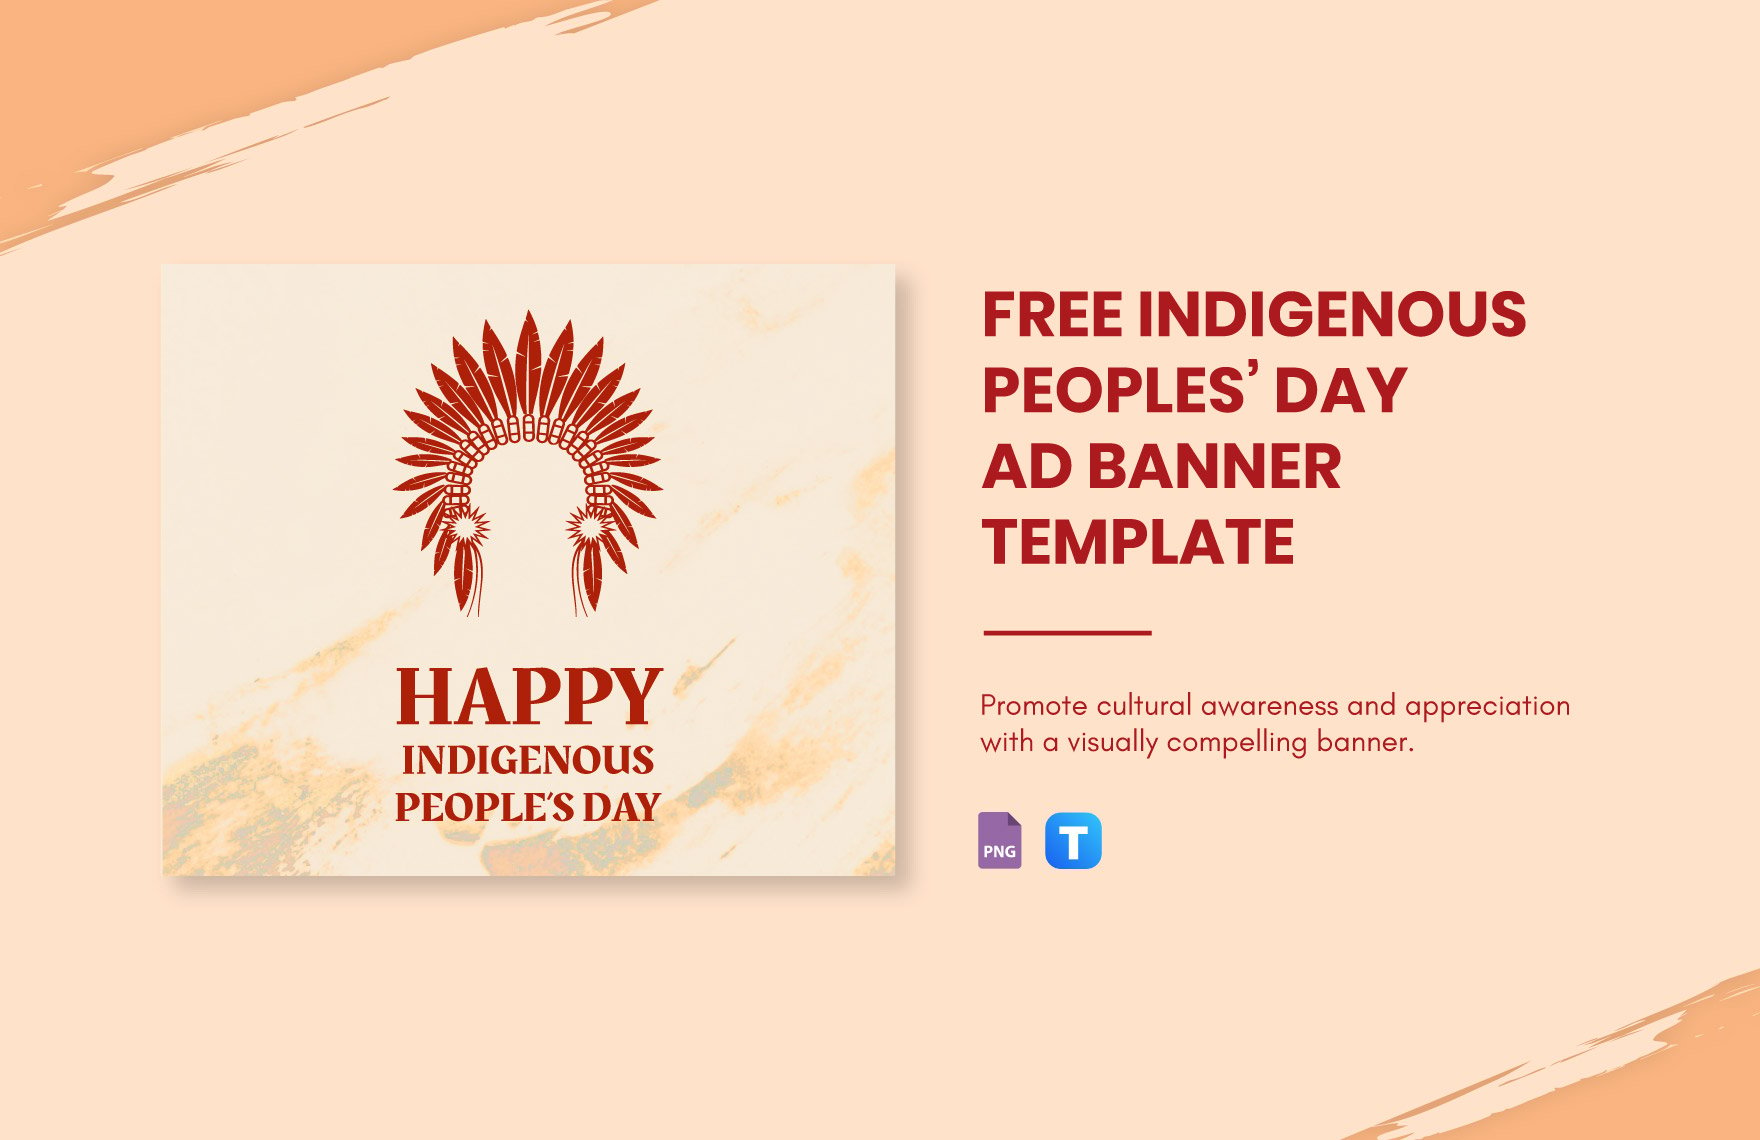 Free Indigenous Peoples' Day Ad Banner Template in PNG